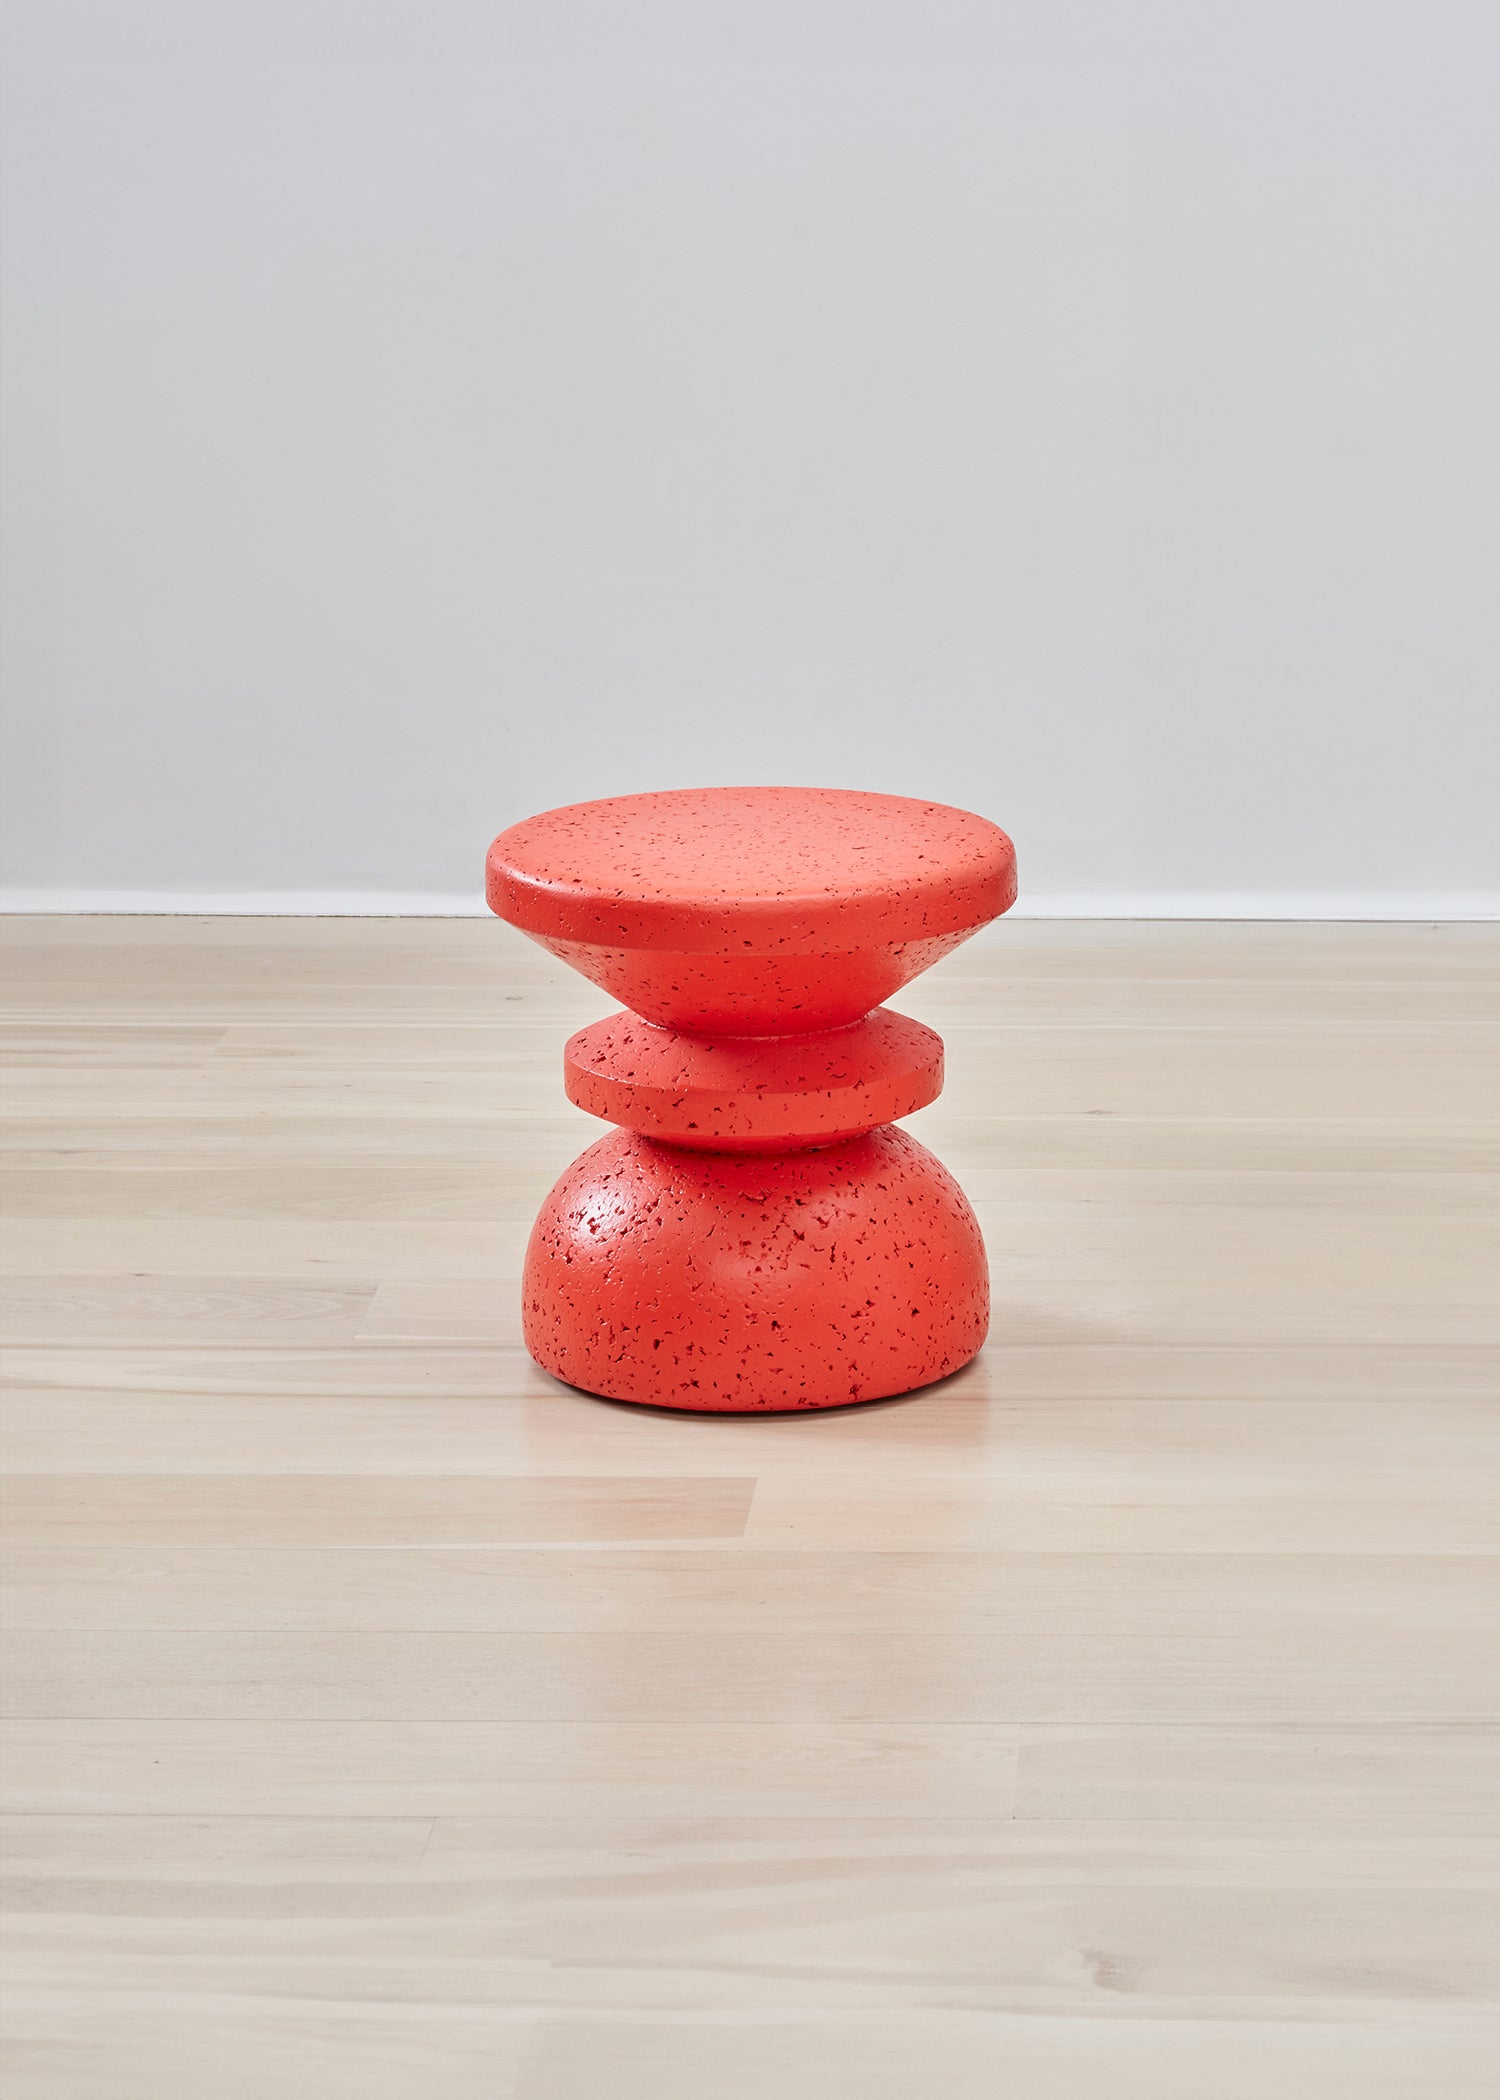 Bold Kanju Wiid Painted African Stacked Cork Stool in a vibrant red, showcasing the perfect blend of avant-garde design and environmental responsibility. This striking stool features a unique stacked cork construction, offering a bold statement piece for eco-conscious interiors seeking a pop of dynamic color.